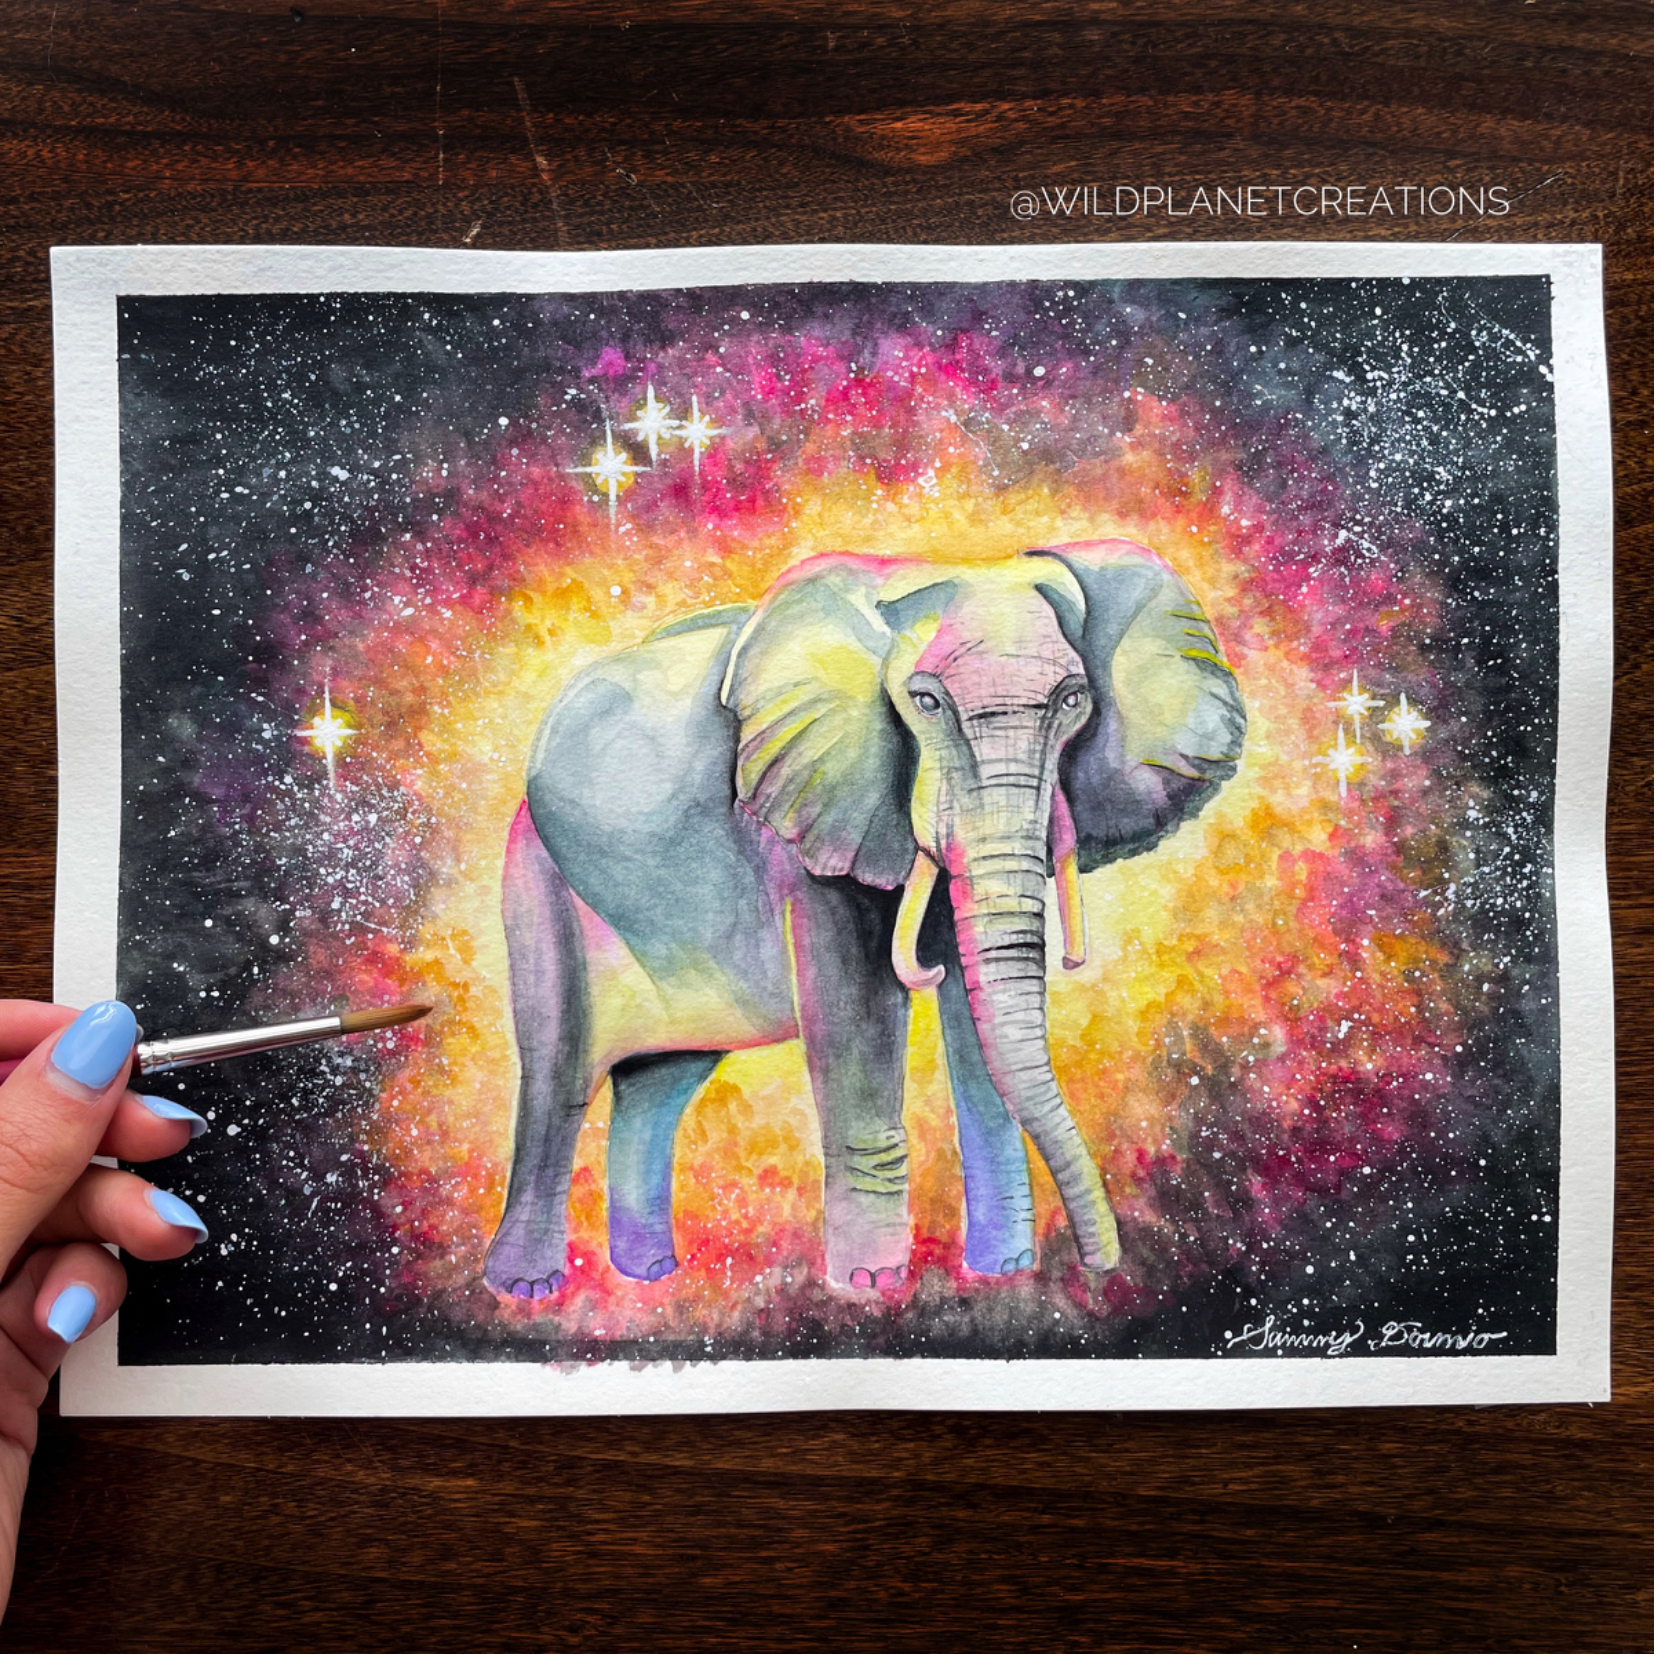 This image displays the original watercolor painting of an African savanna elephant from the Wild Planet Creations collection.